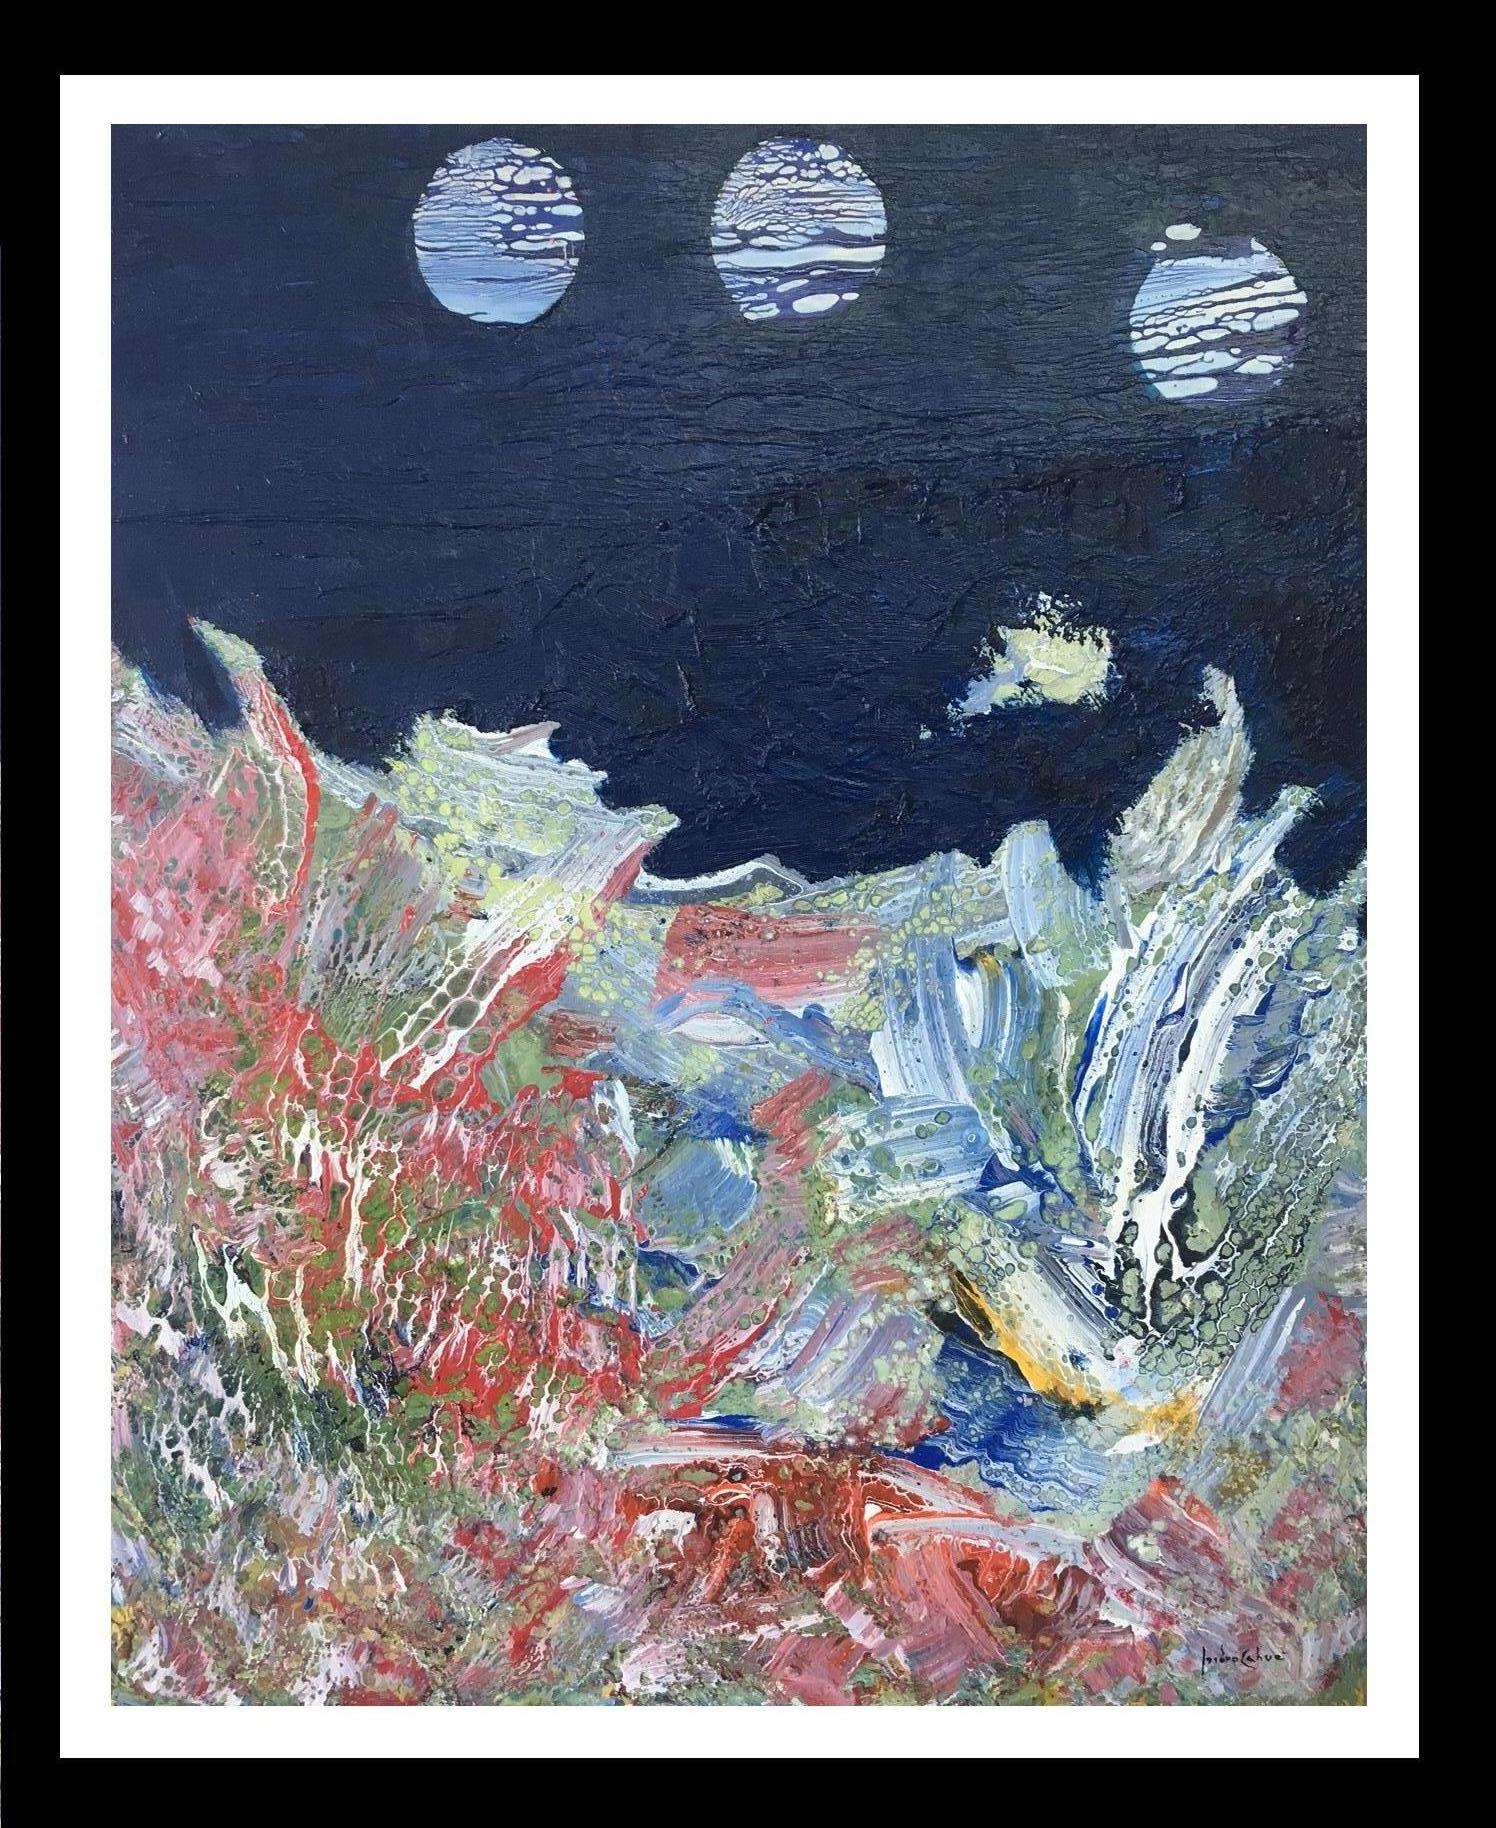  I. Cahue  The Sea and the Moon. original abstract acrylic canvas painting. - Painting by Isidro Cahue